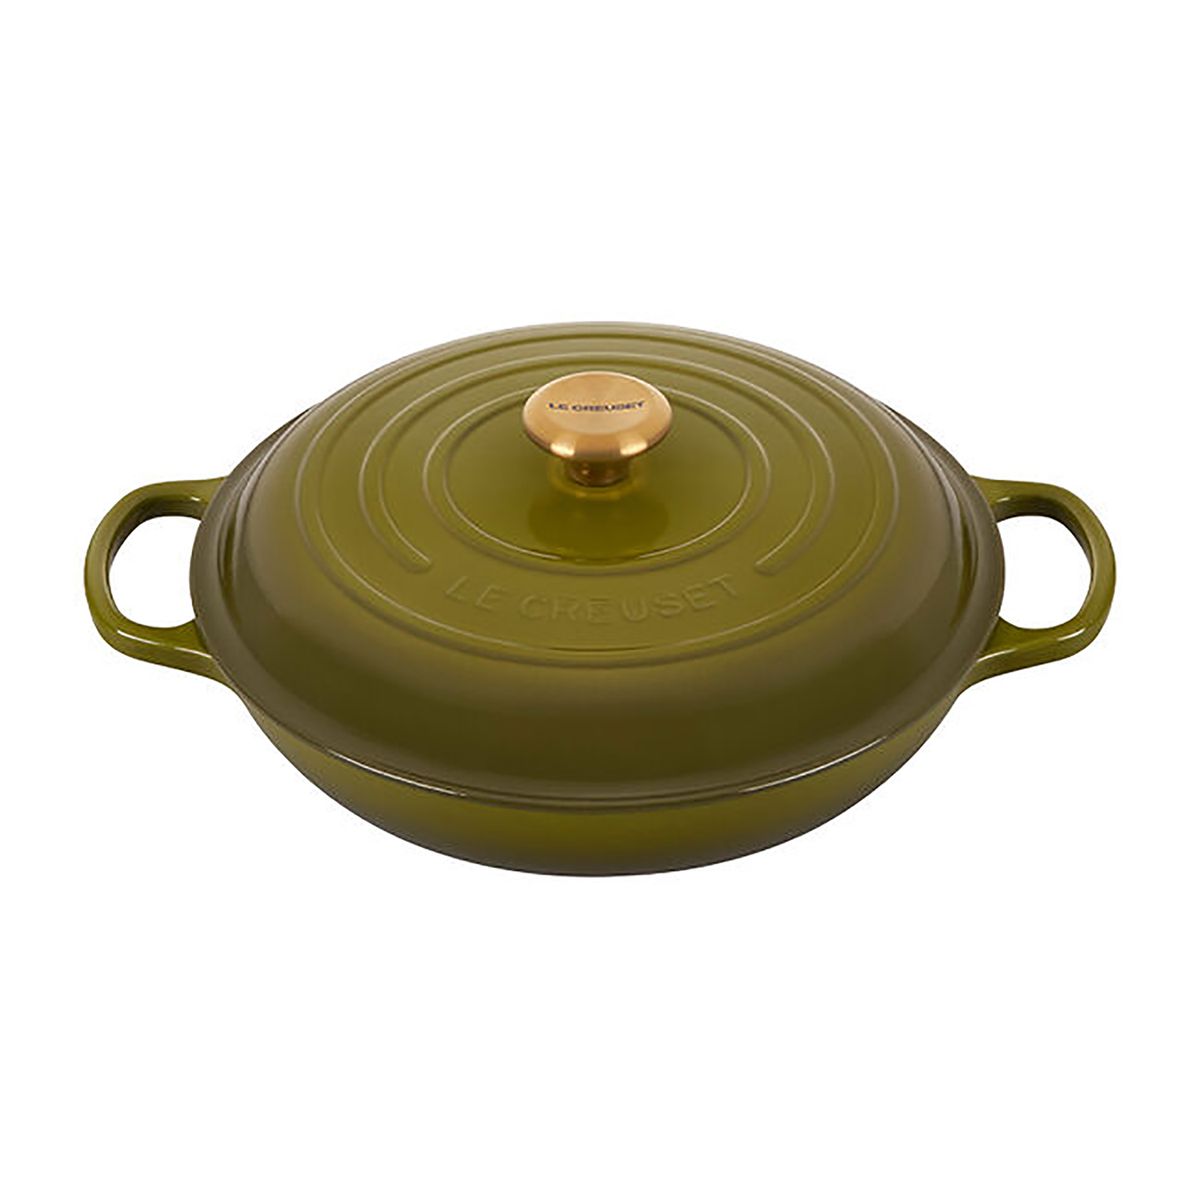 Le Creuset olive cookware